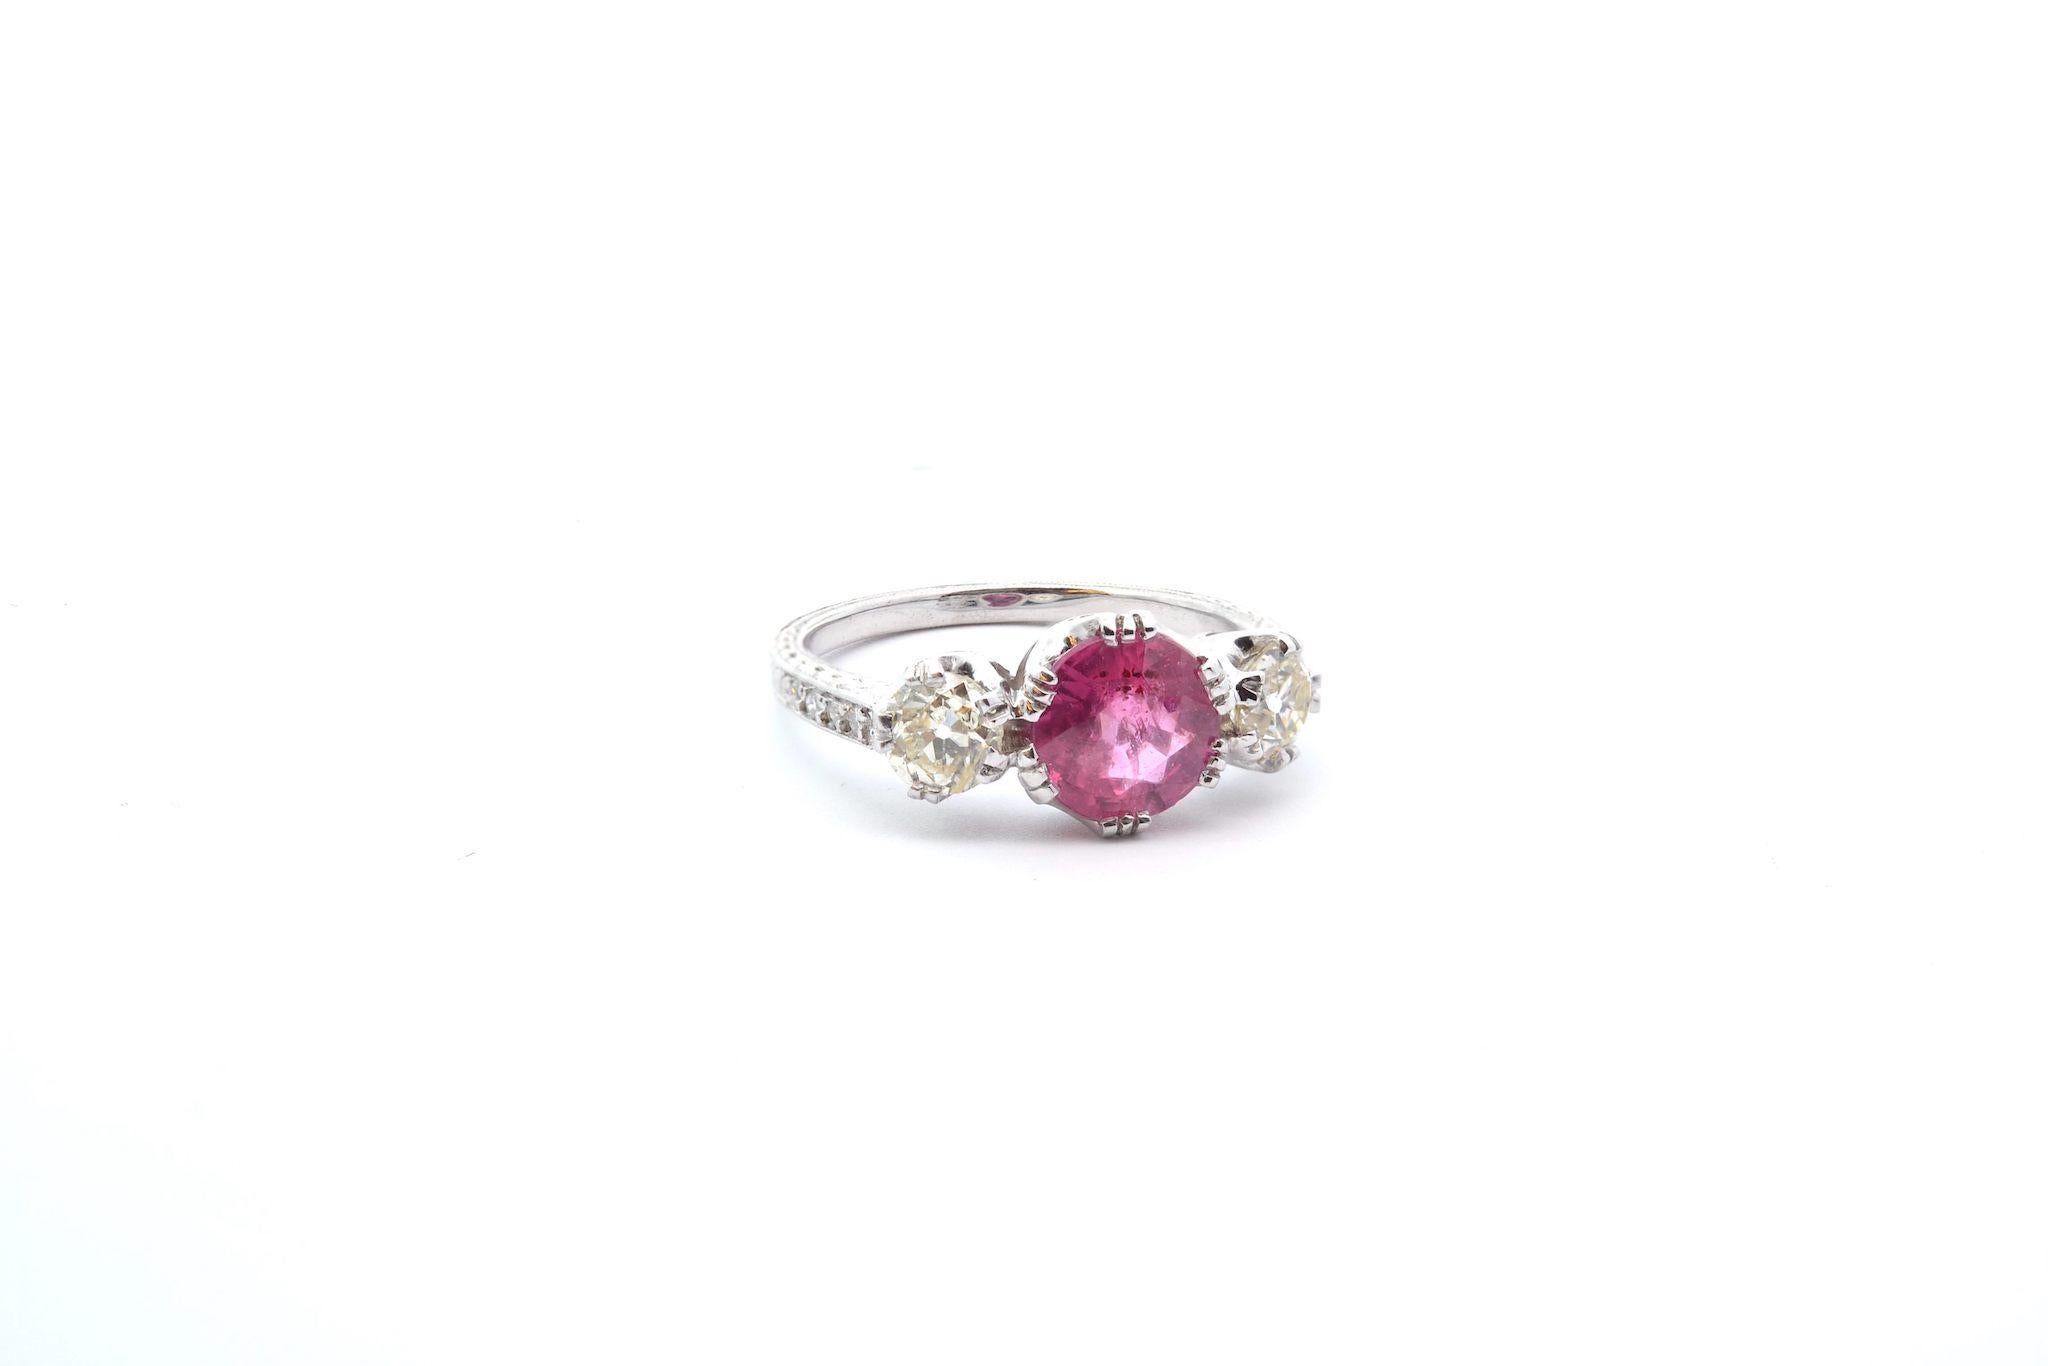 Round Cut 1.82 carats pink sapphire ring with 2 diamonds For Sale